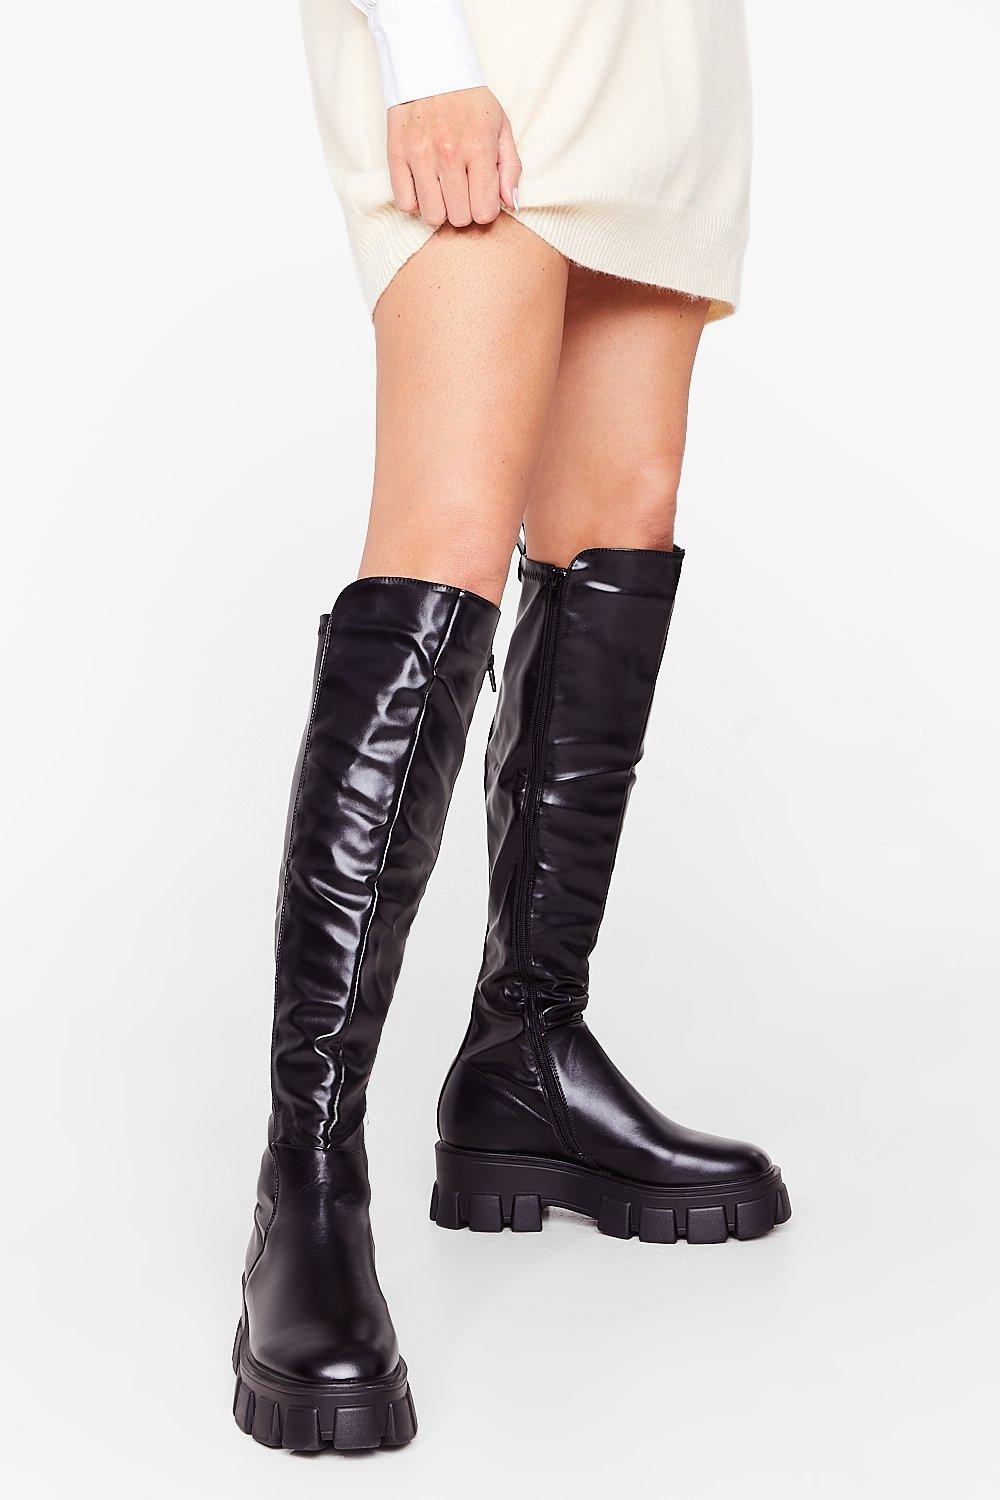 https://media.nastygal.com/i/nastygal/agg44735_black_xl_2/let's-kick-it-faux-leather-knee-high-boots